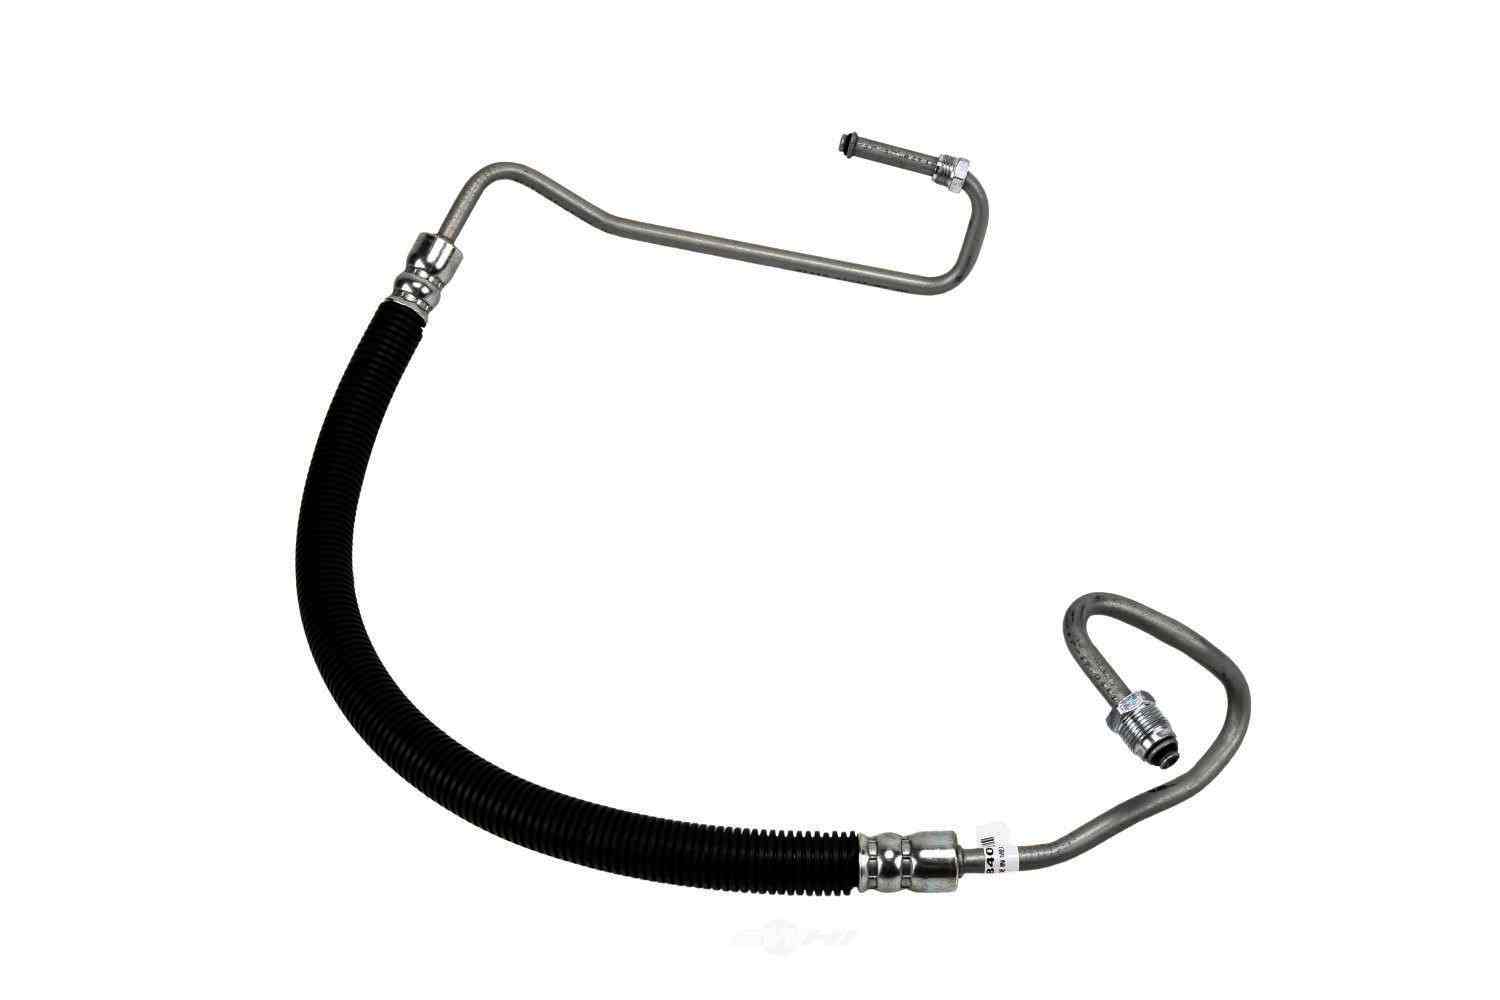 GM GENUINE PARTS - Power Steering Pressure Hose (To Gear) - GMP 15295840